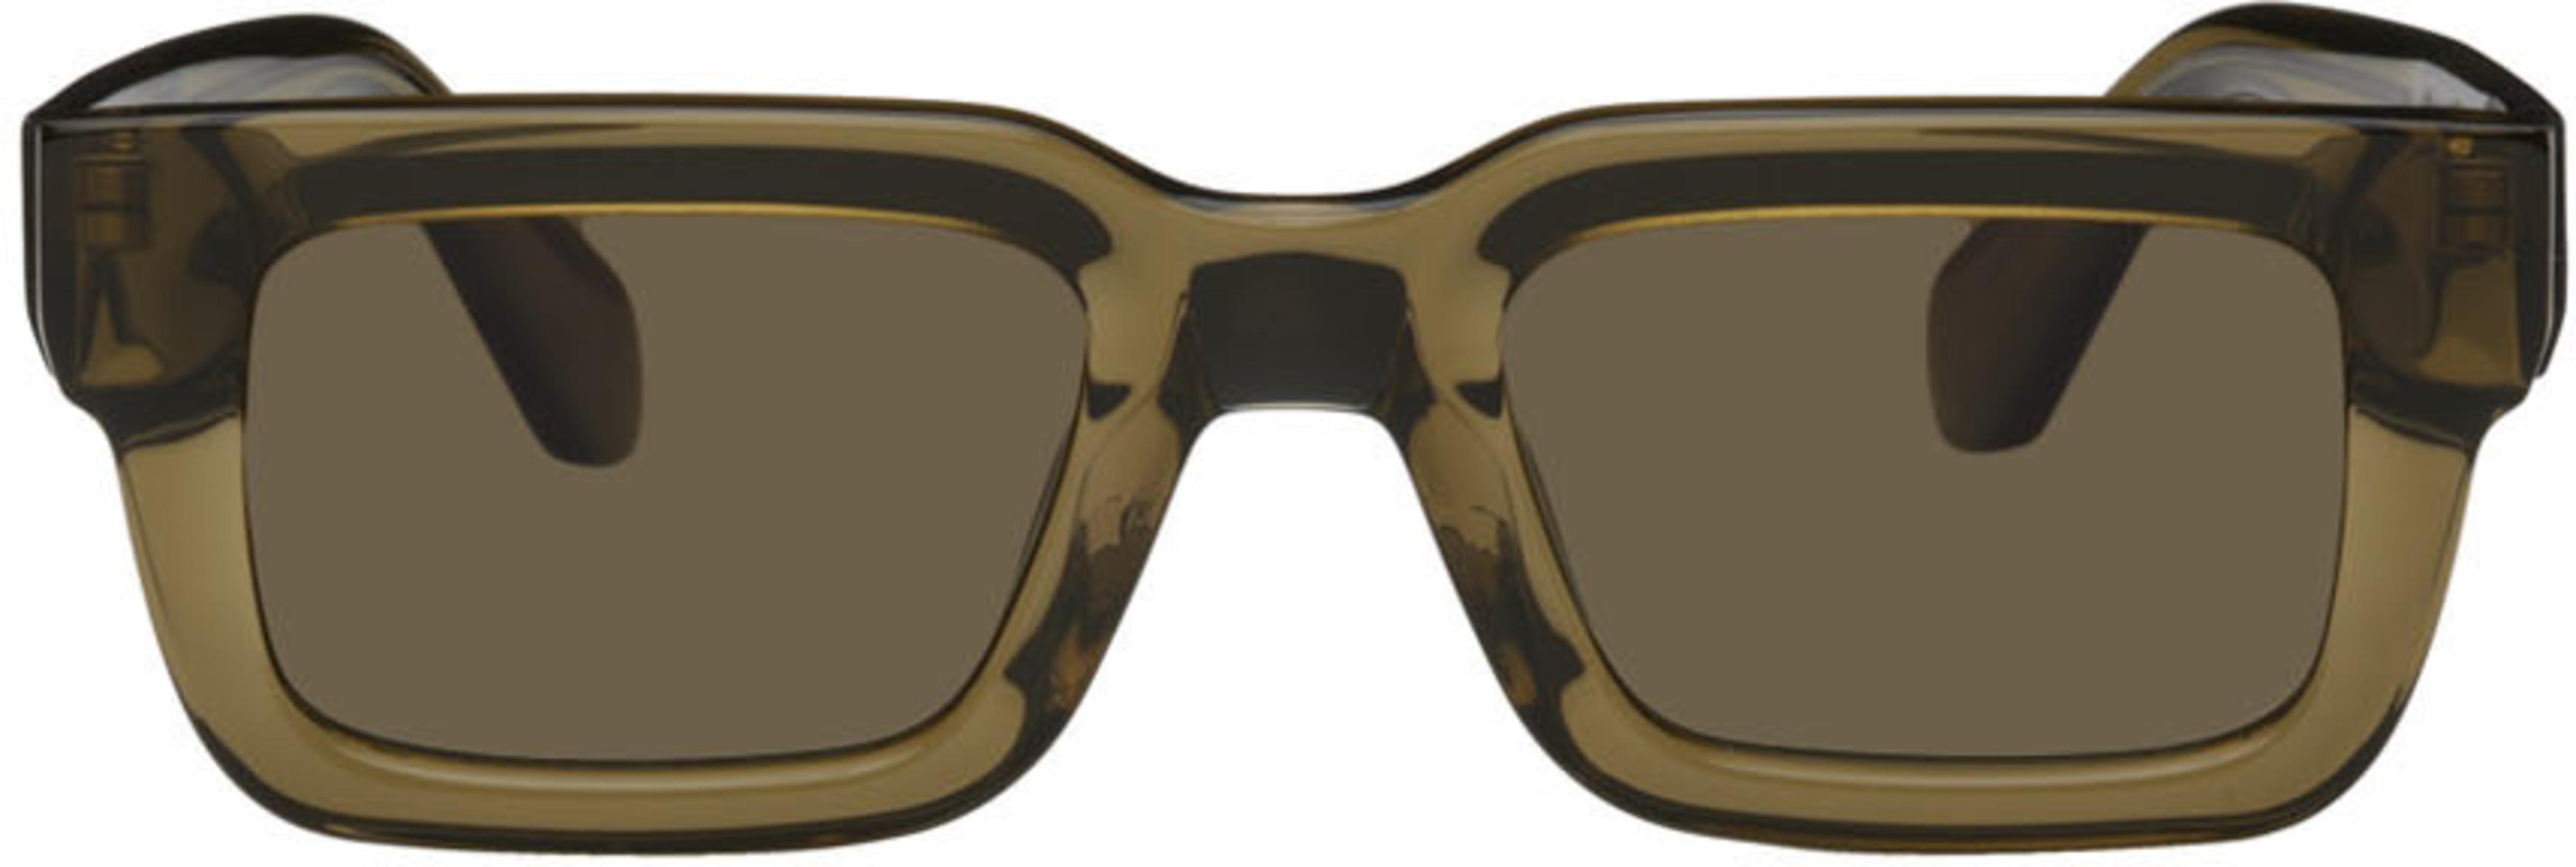 Green 05 Sunglasses by CHIMI